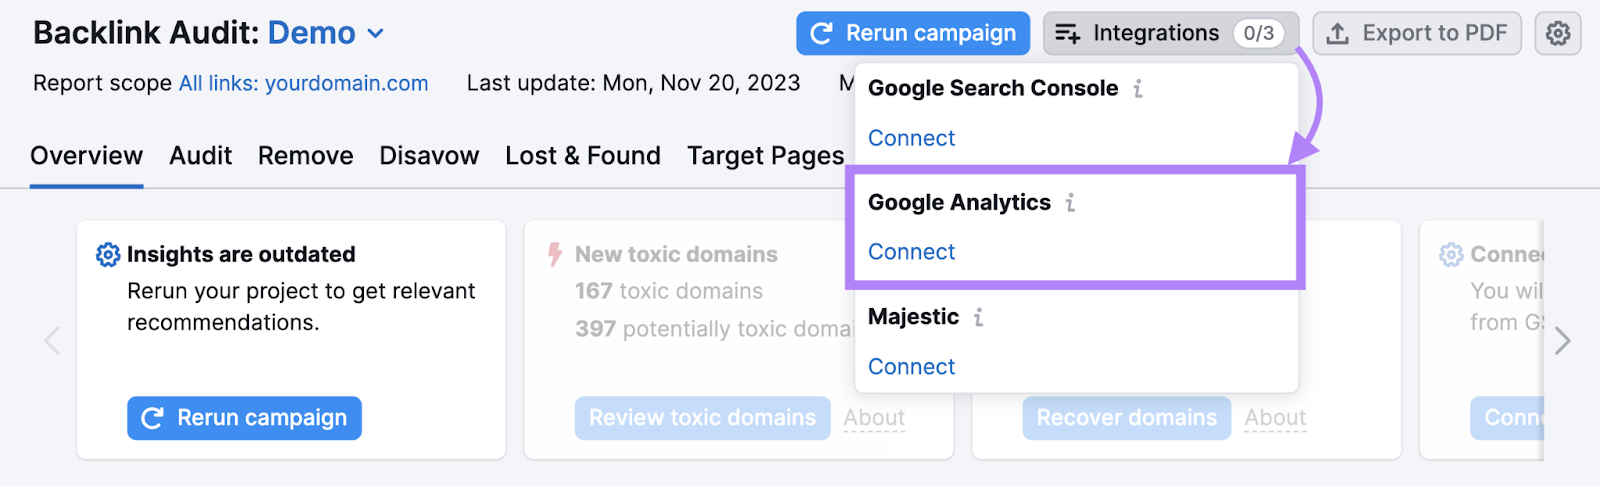 Connect Google Analytics to Backlink Audit tool